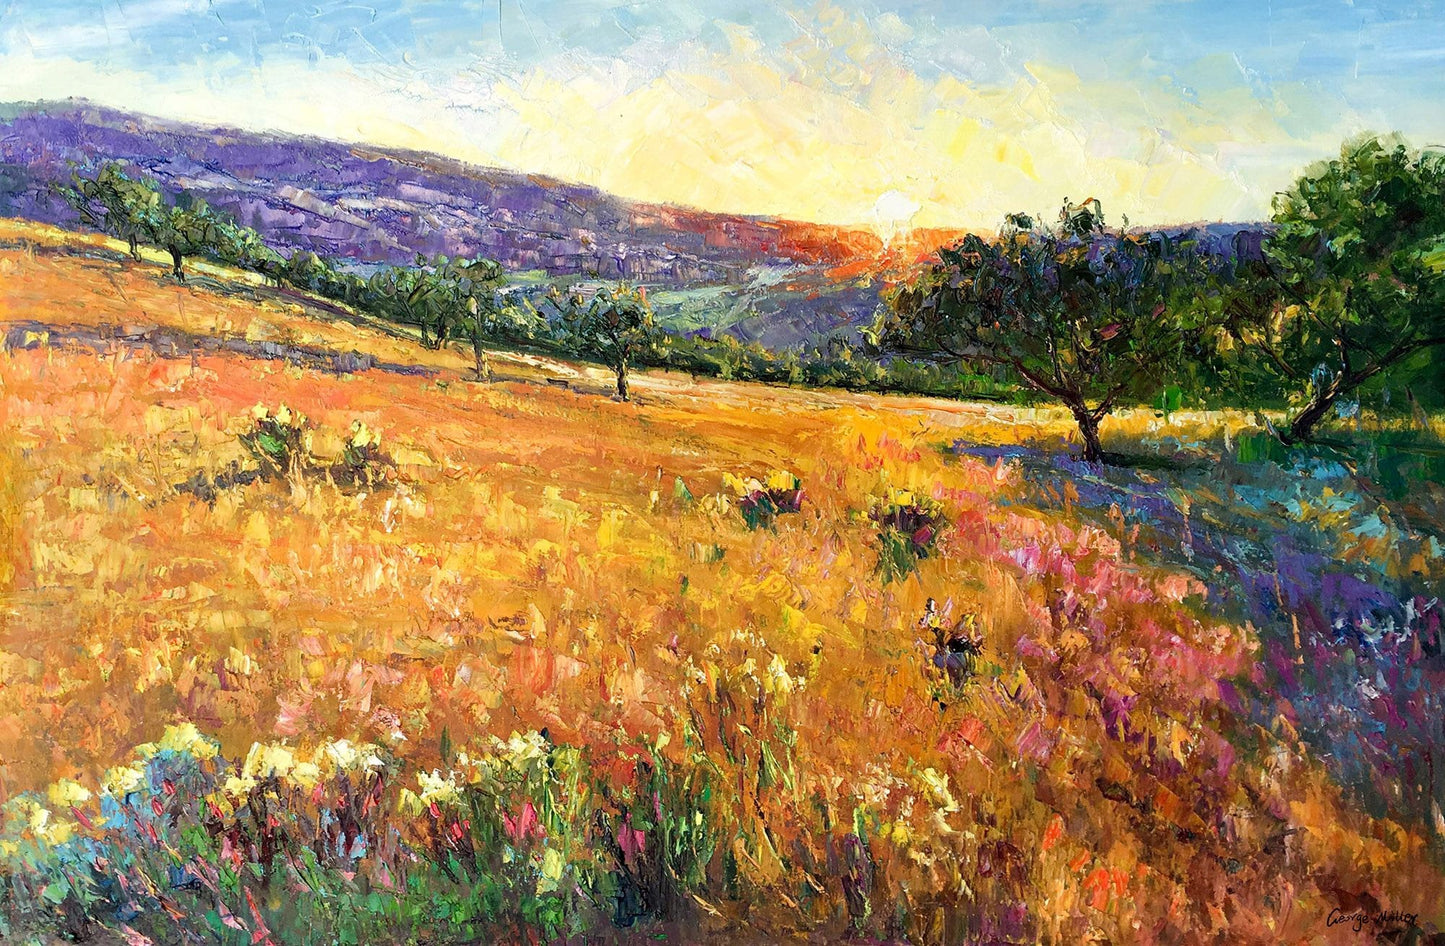 Landscape Oil Painting Tuscany Sunset, Original Painting, Contemporary Art, Large Painting, Kitchen Decor, Abstract Canvas Art, Canvas Art